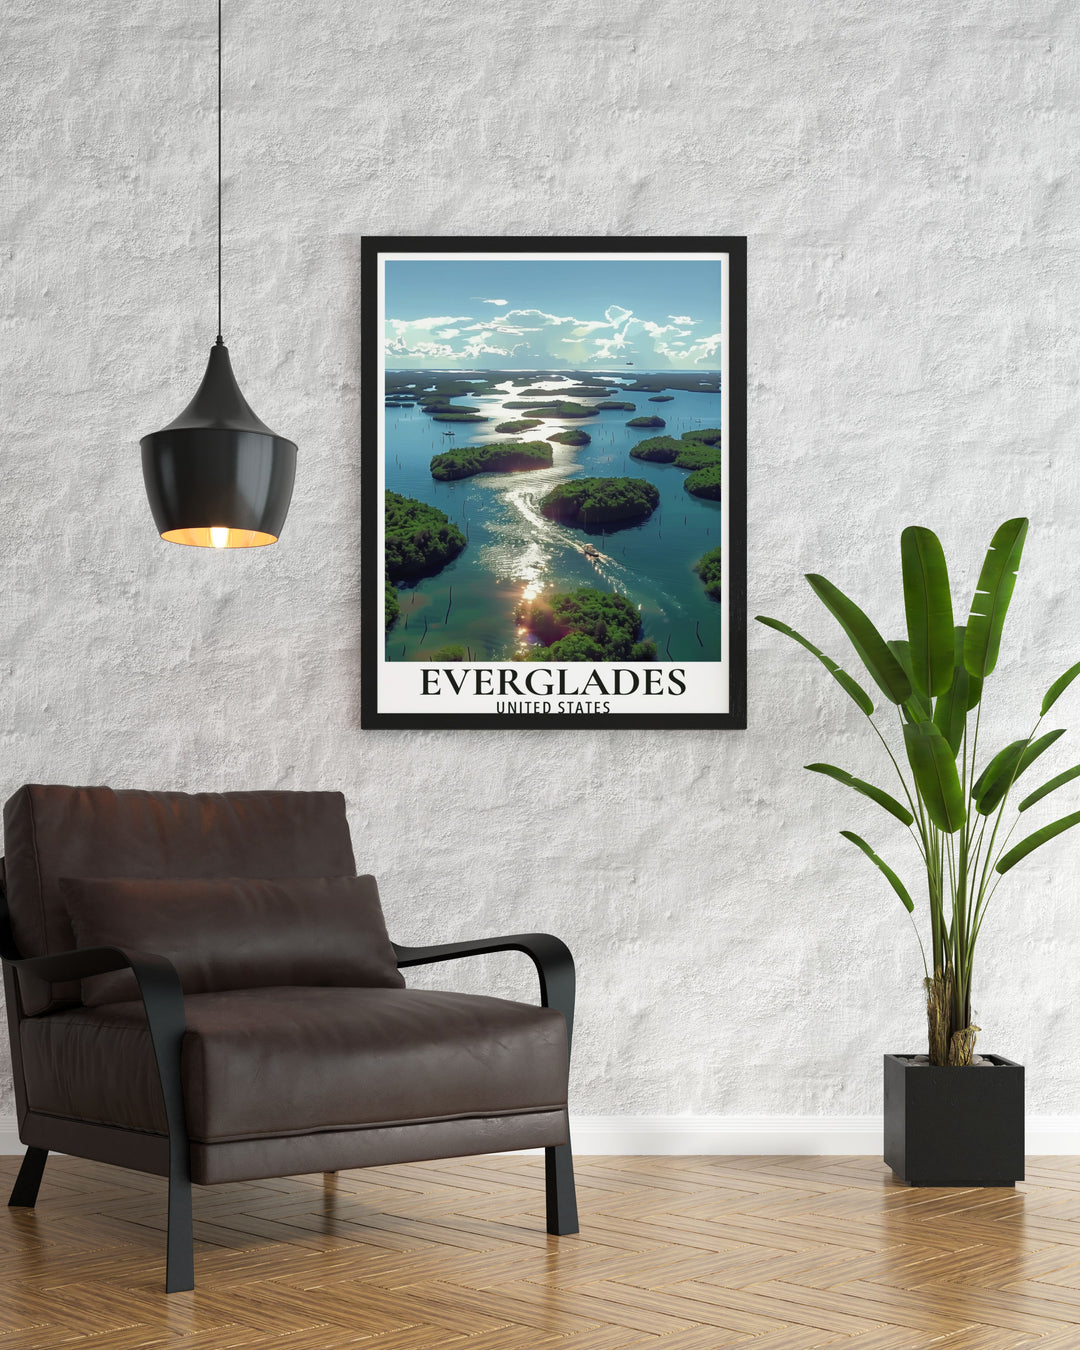 Florida Poster capturing the breathtaking scenery of the Everglades. Perfect for nature enthusiasts and travelers. This print highlights the unique beauty of the National Park and includes the picturesque 10 thousand islands.